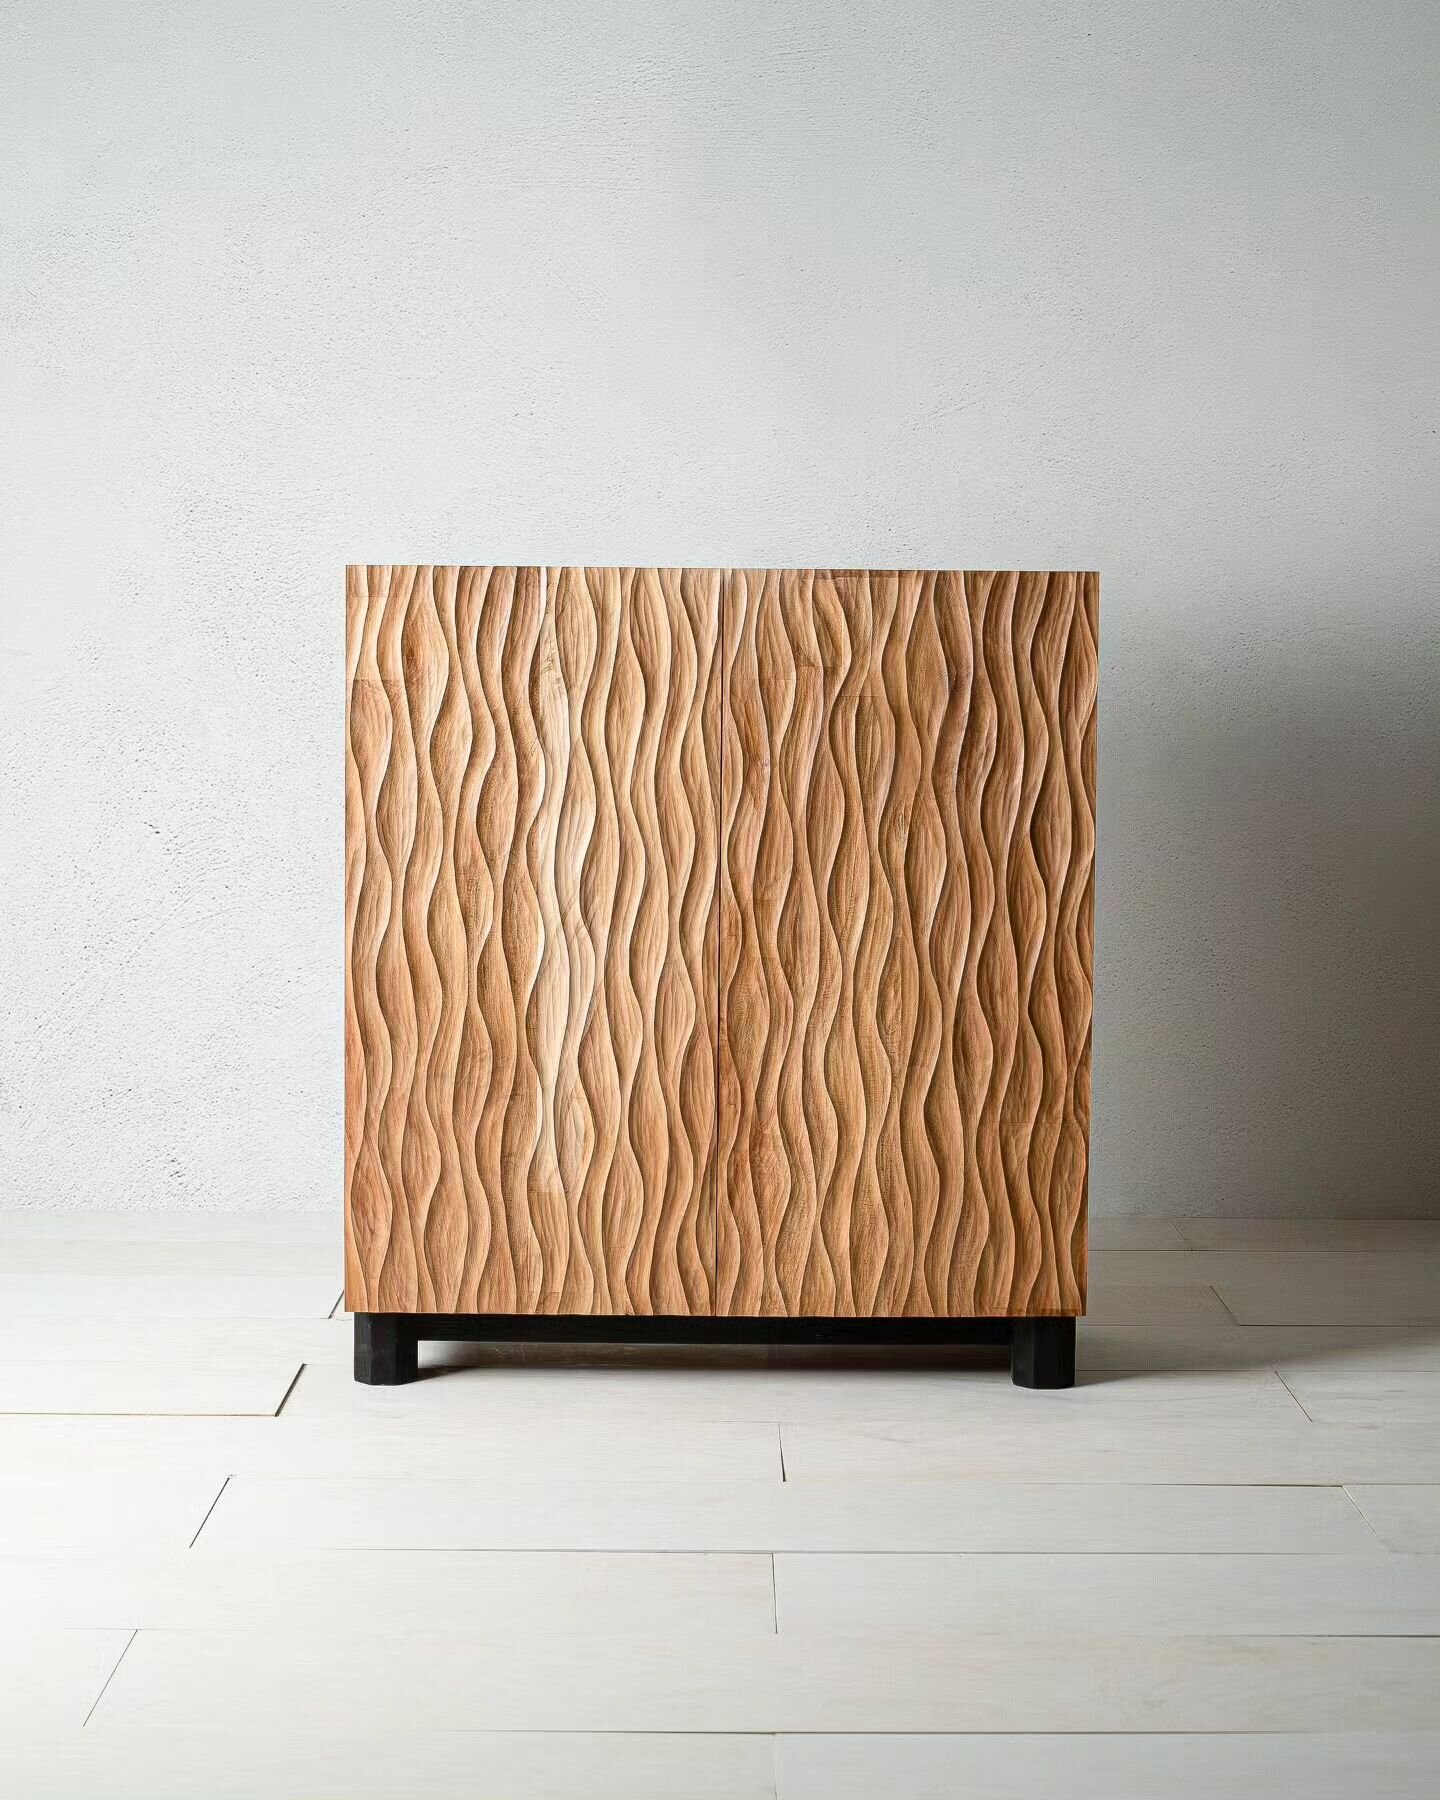 Meet our latest creation, the Selene cabinet.

Made from some beautiful, locally-sourced copper beech, the piece features a dramatic, flowing carved texture, hand-cut dovetails,  and octagonal legs, scorched to a deep black 🔥

Available now on our w